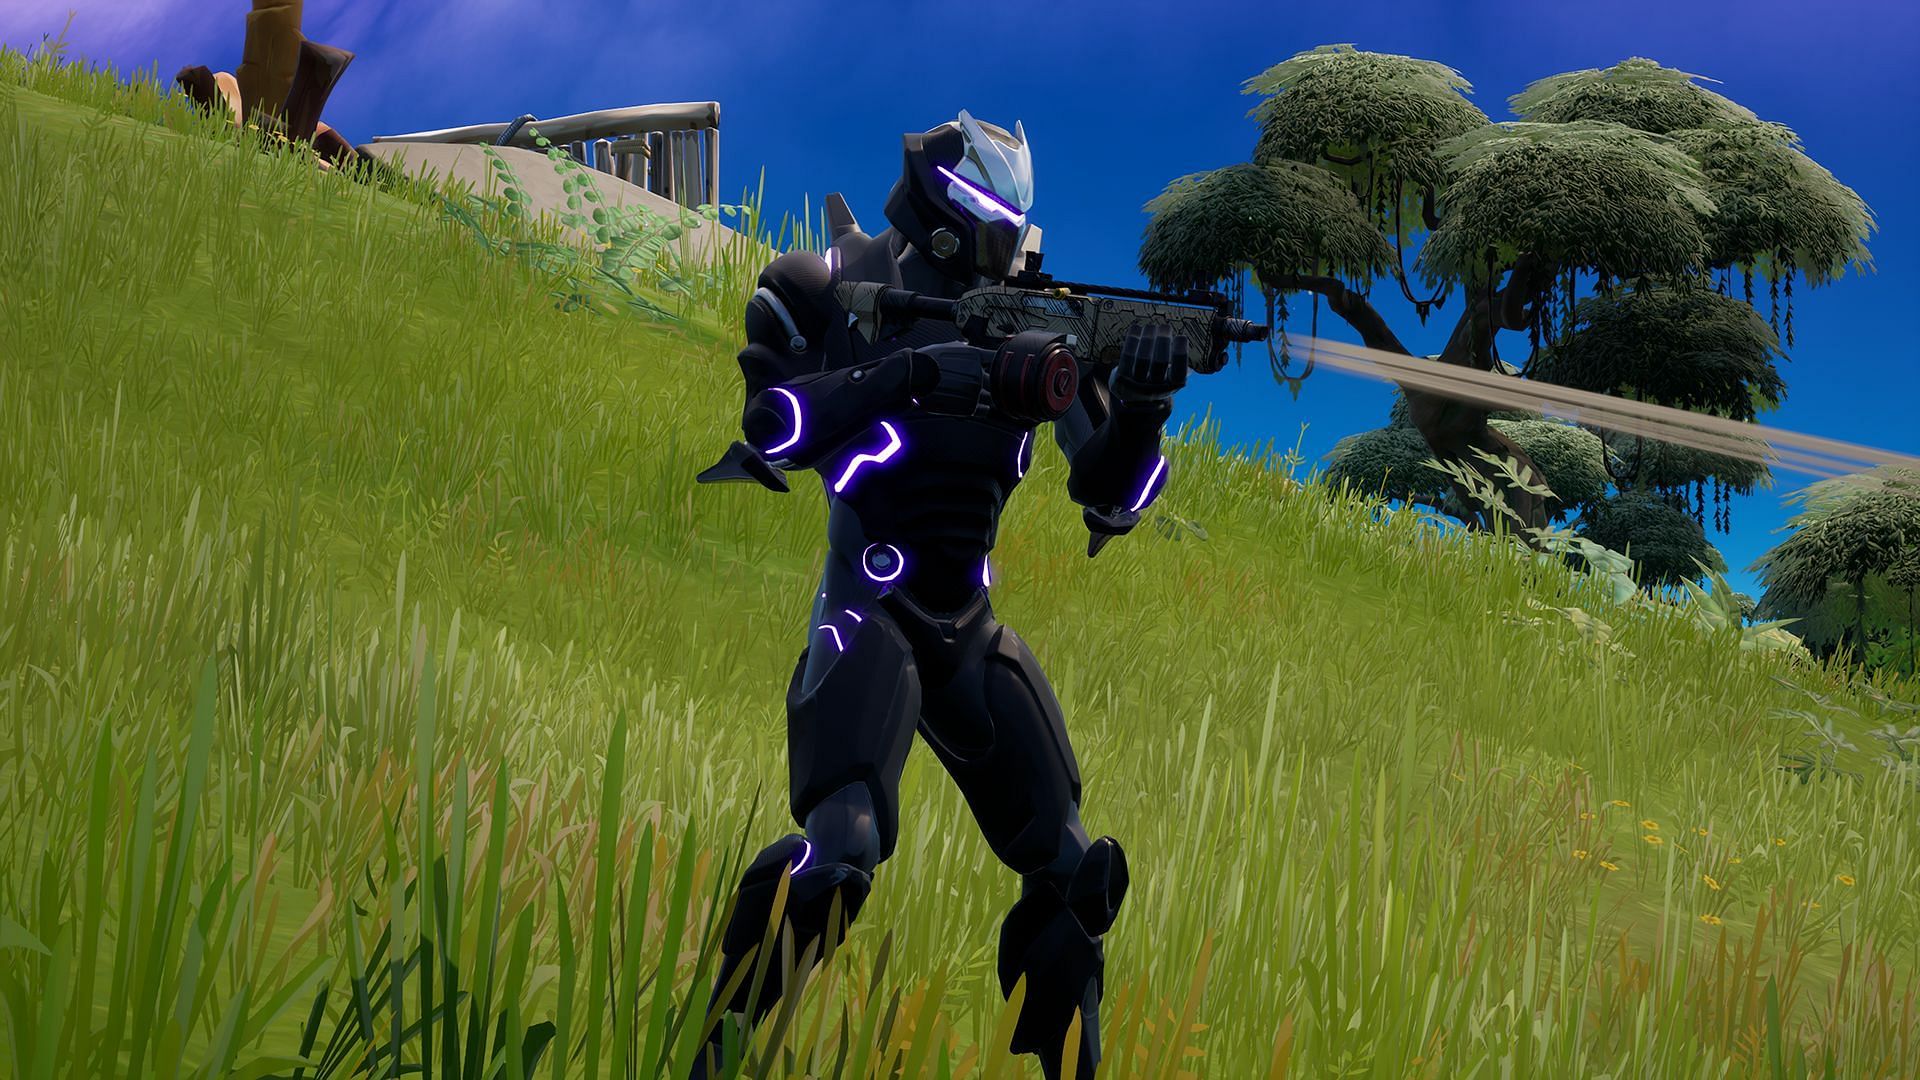 Fortnite Charge SMG has been released, and it is absolutely amazing (Image via Epic Games)